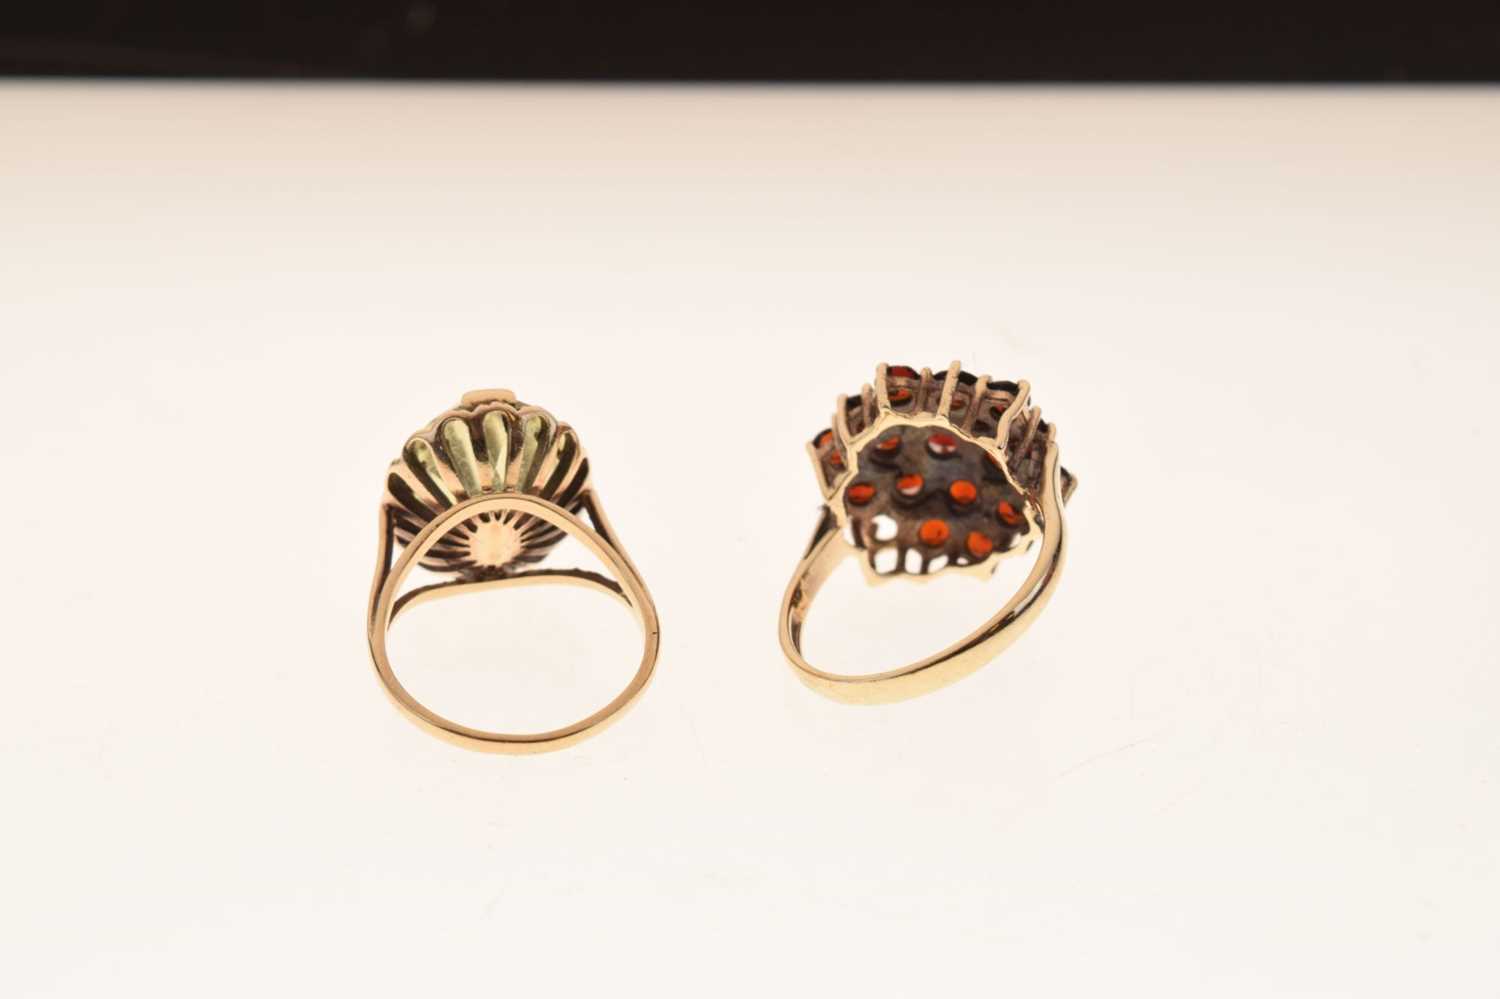 Two 1970s period dress rings - Image 5 of 9